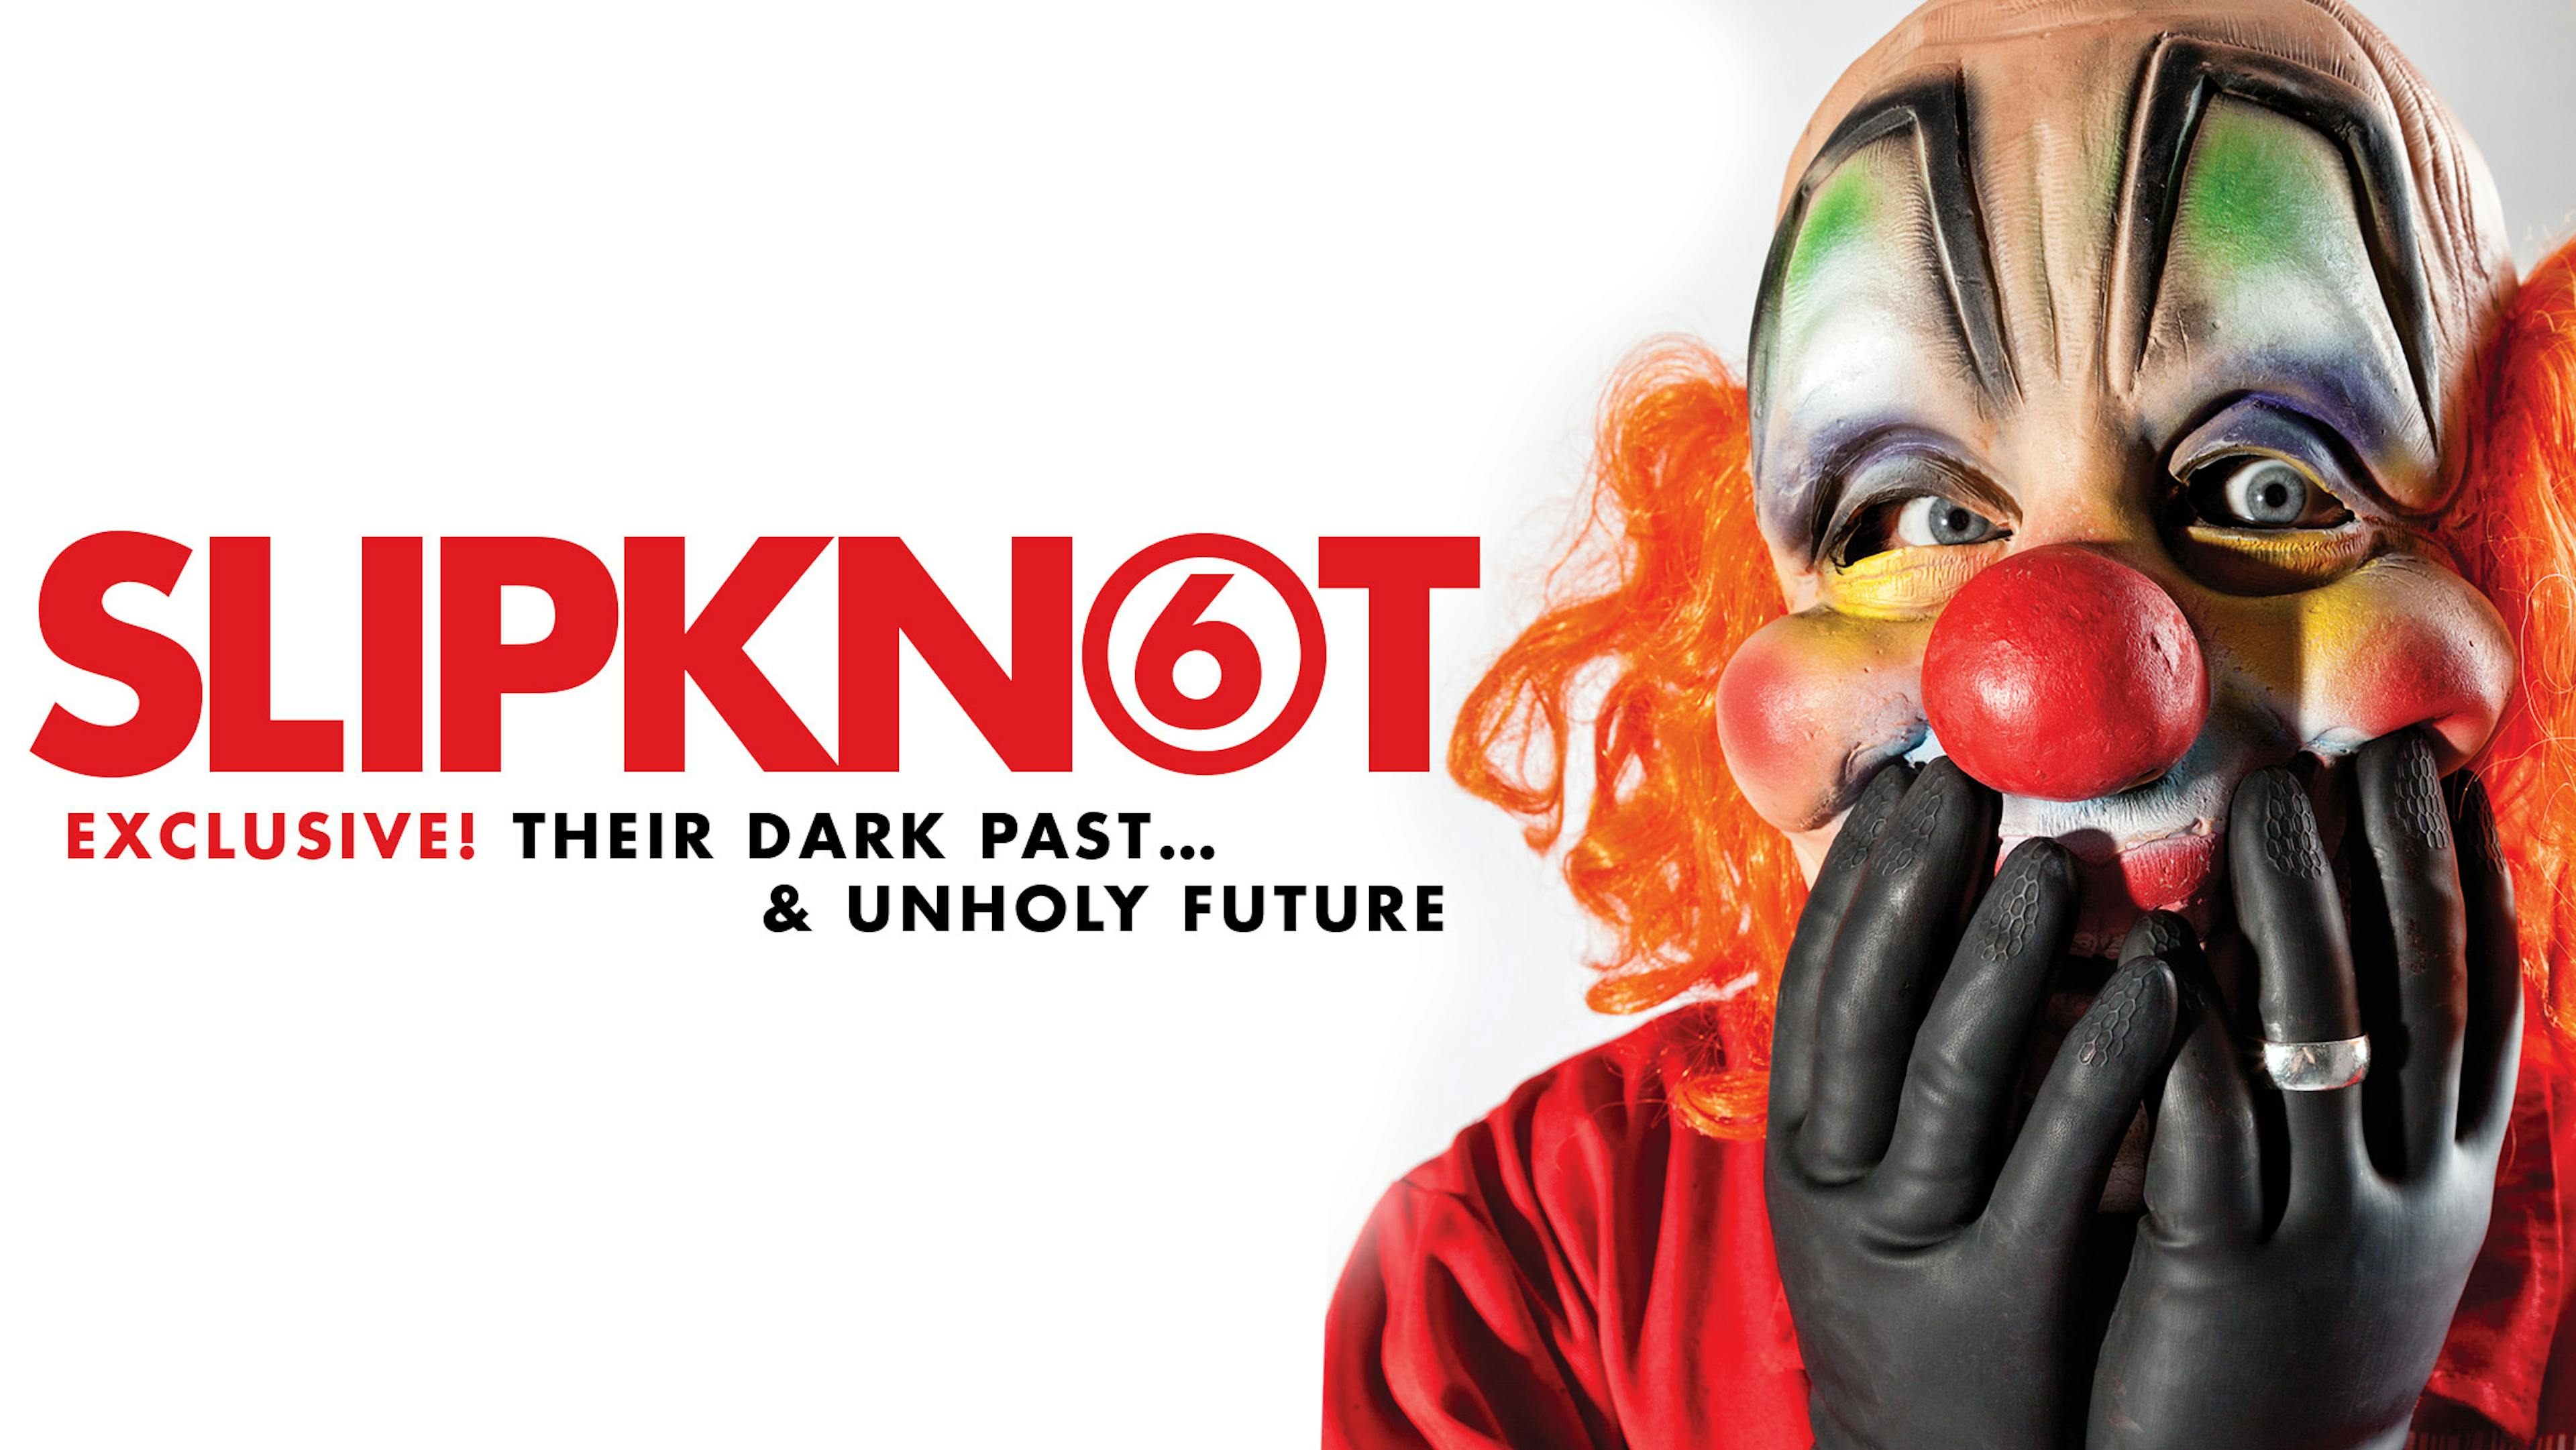 K!1751 – Slipknot: "You Have No Idea What's Coming Next…"